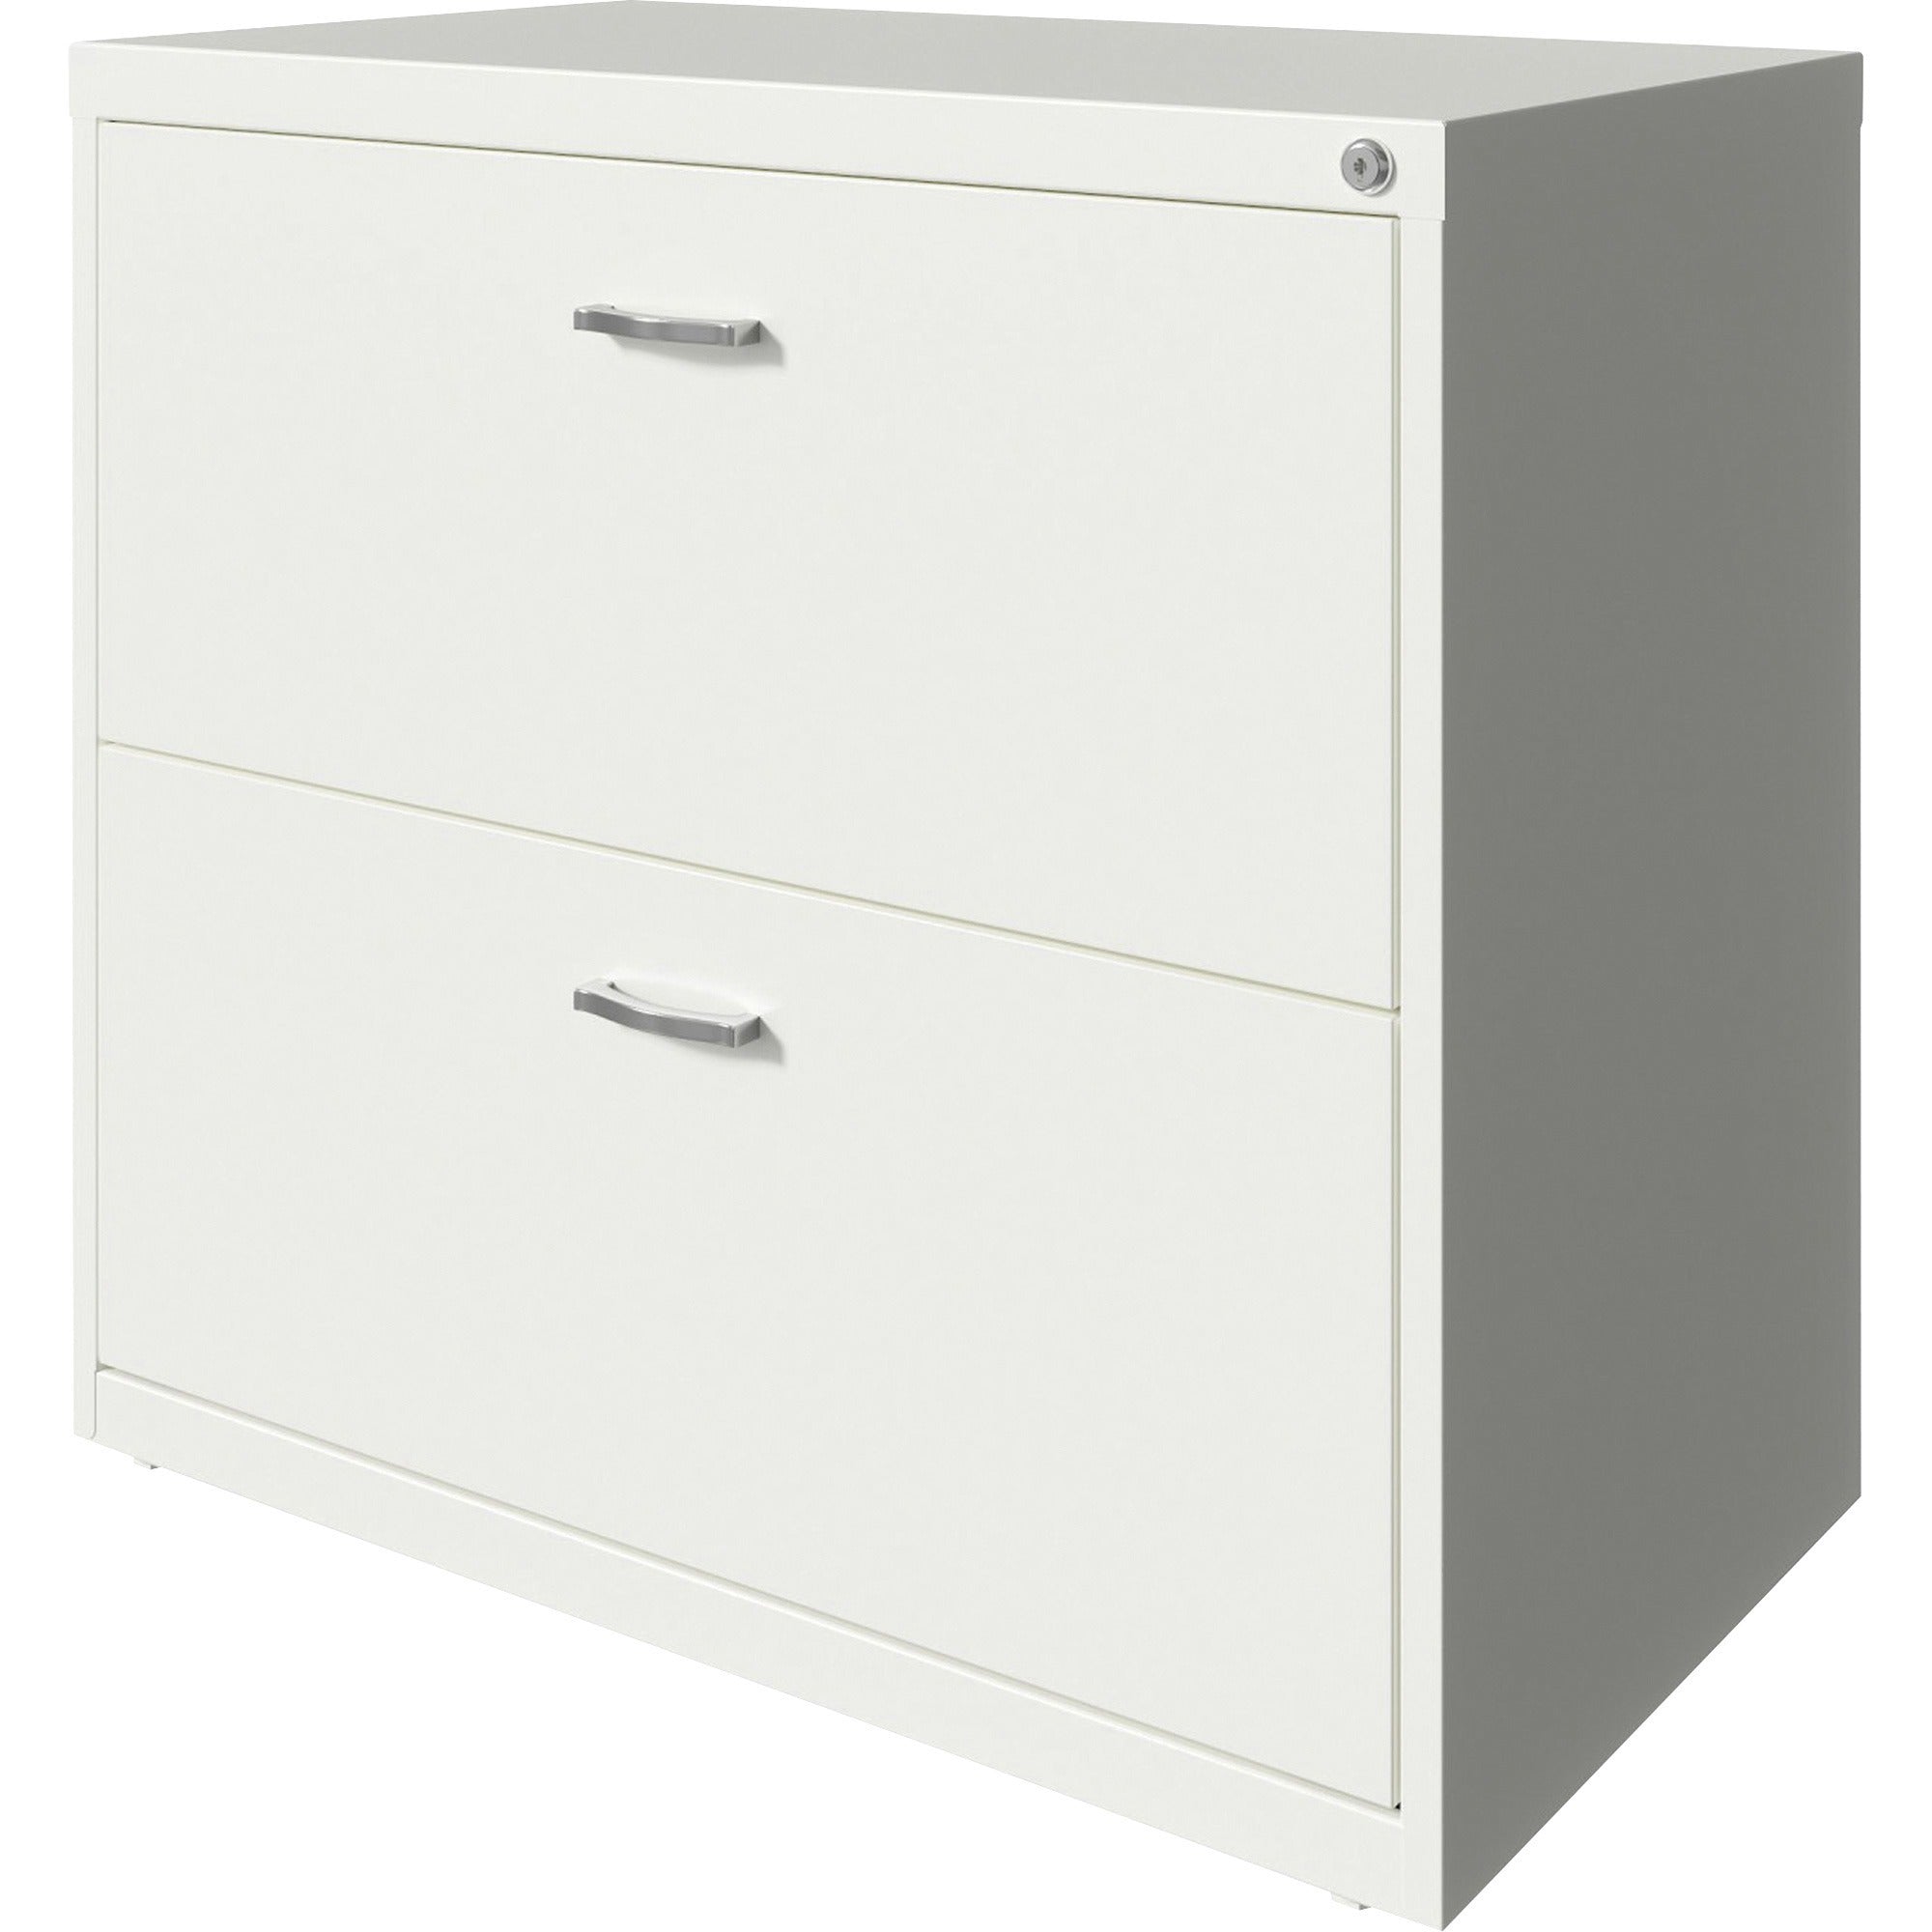 nusparc-2-drawer-lateral-file-30-x-176-x-277-2-x-drawers-for-file-letter-lateral-interlocking-anti-tip-ball-bearing-slide-ball-bearing-suspension-removable-lock-leveling-glide-adjustable-glide-durable-nonporous-surface-whit_nprlf218aawe - 3